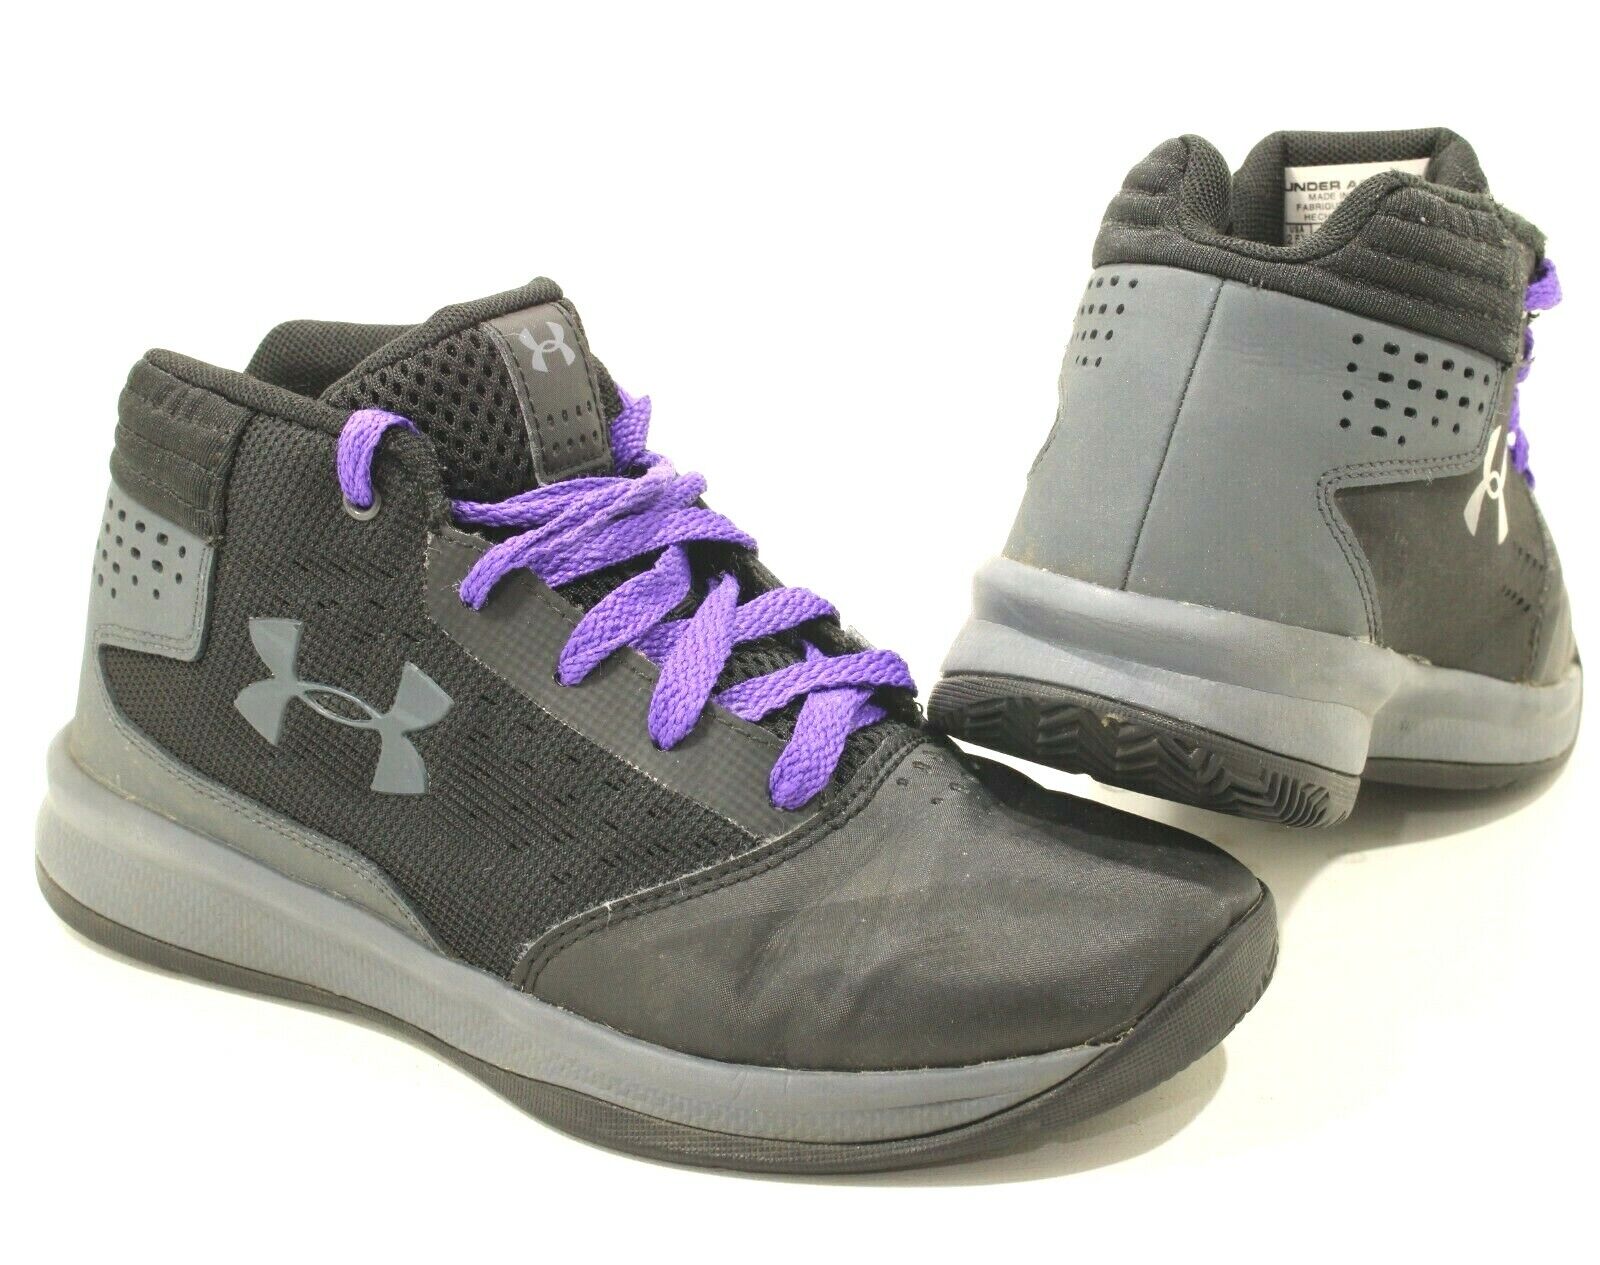 Under Armour Gray High Top Basketball Shoes Boys Size 2.5y Youth Ymuv B4